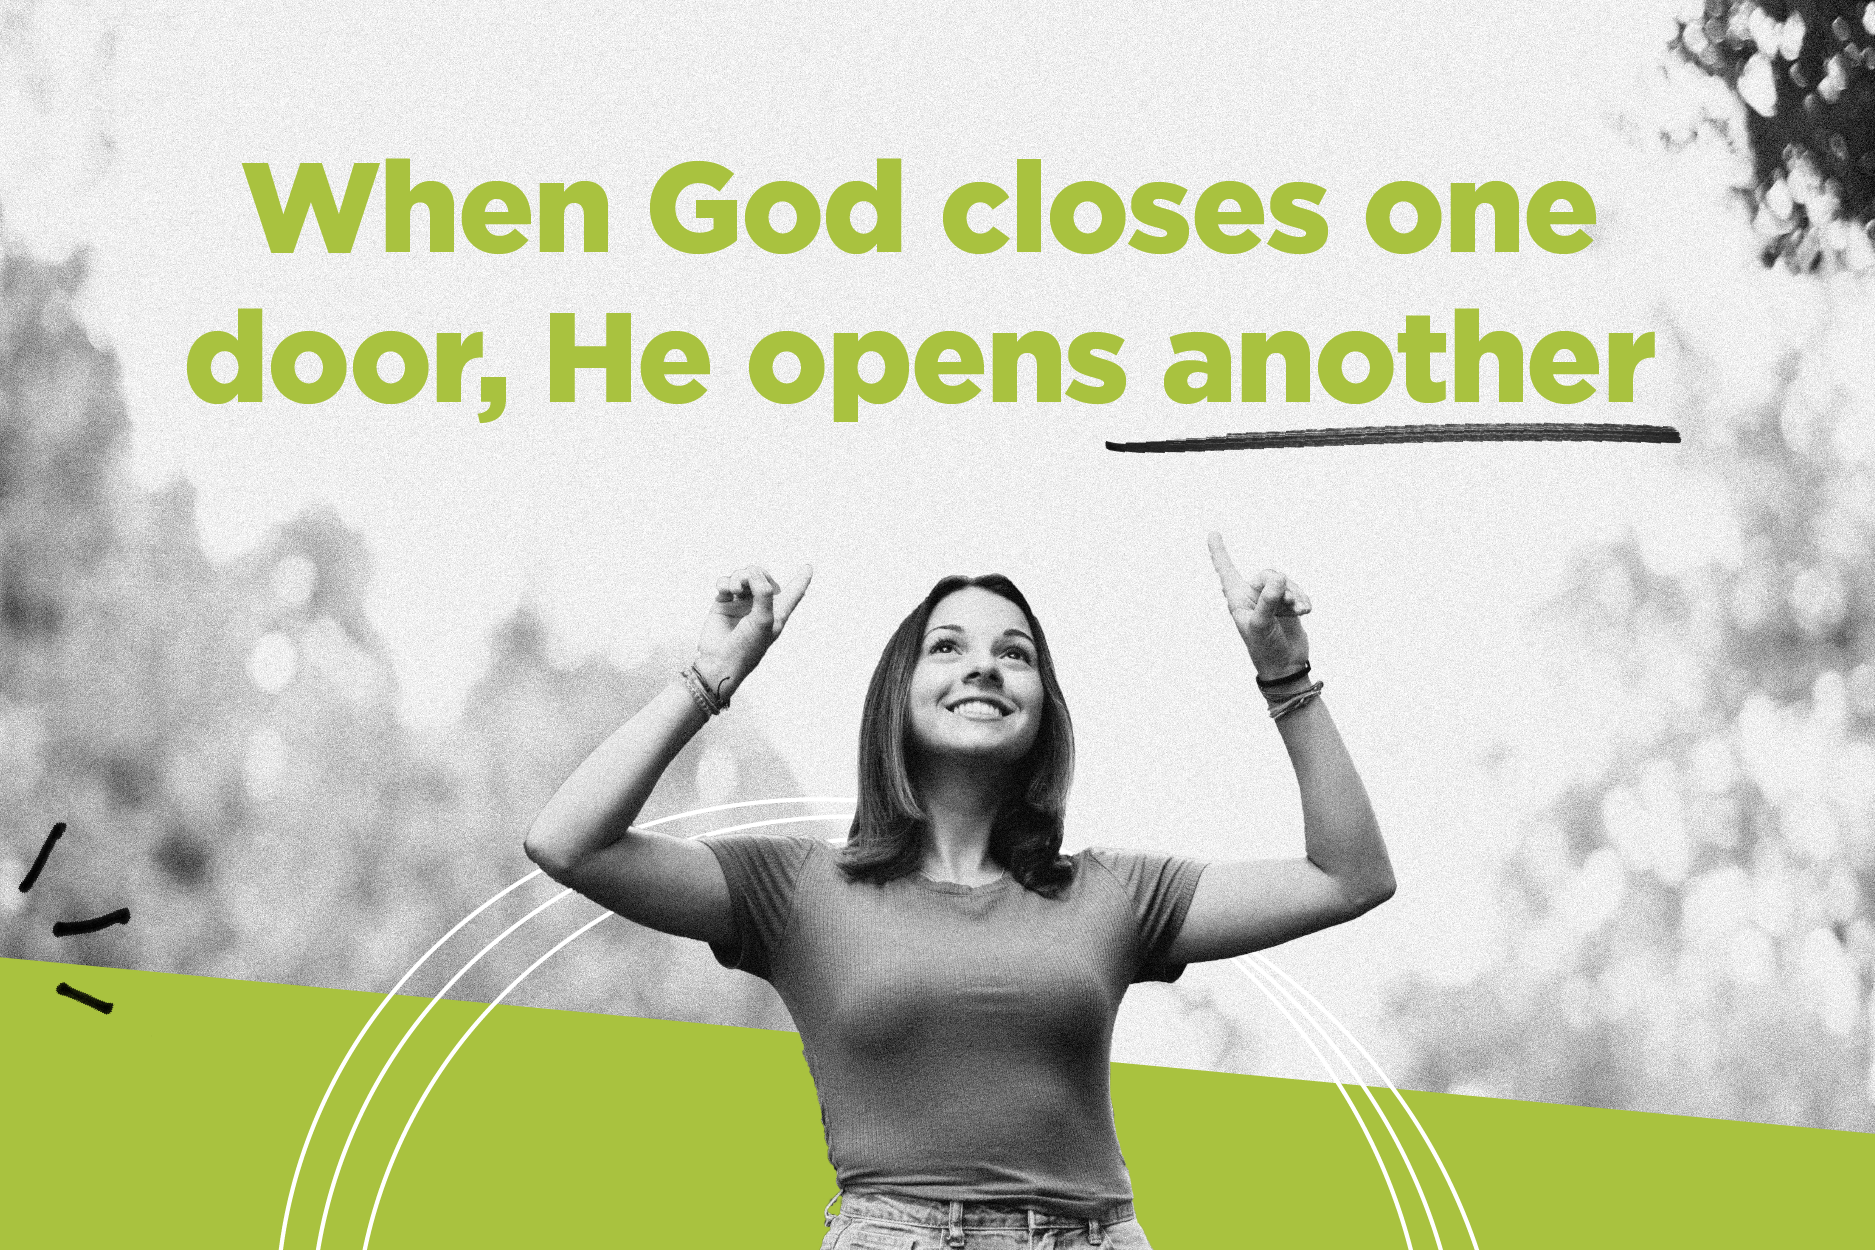 Young woman smiling while pointing at quote above "When God closes one door, He opens another".